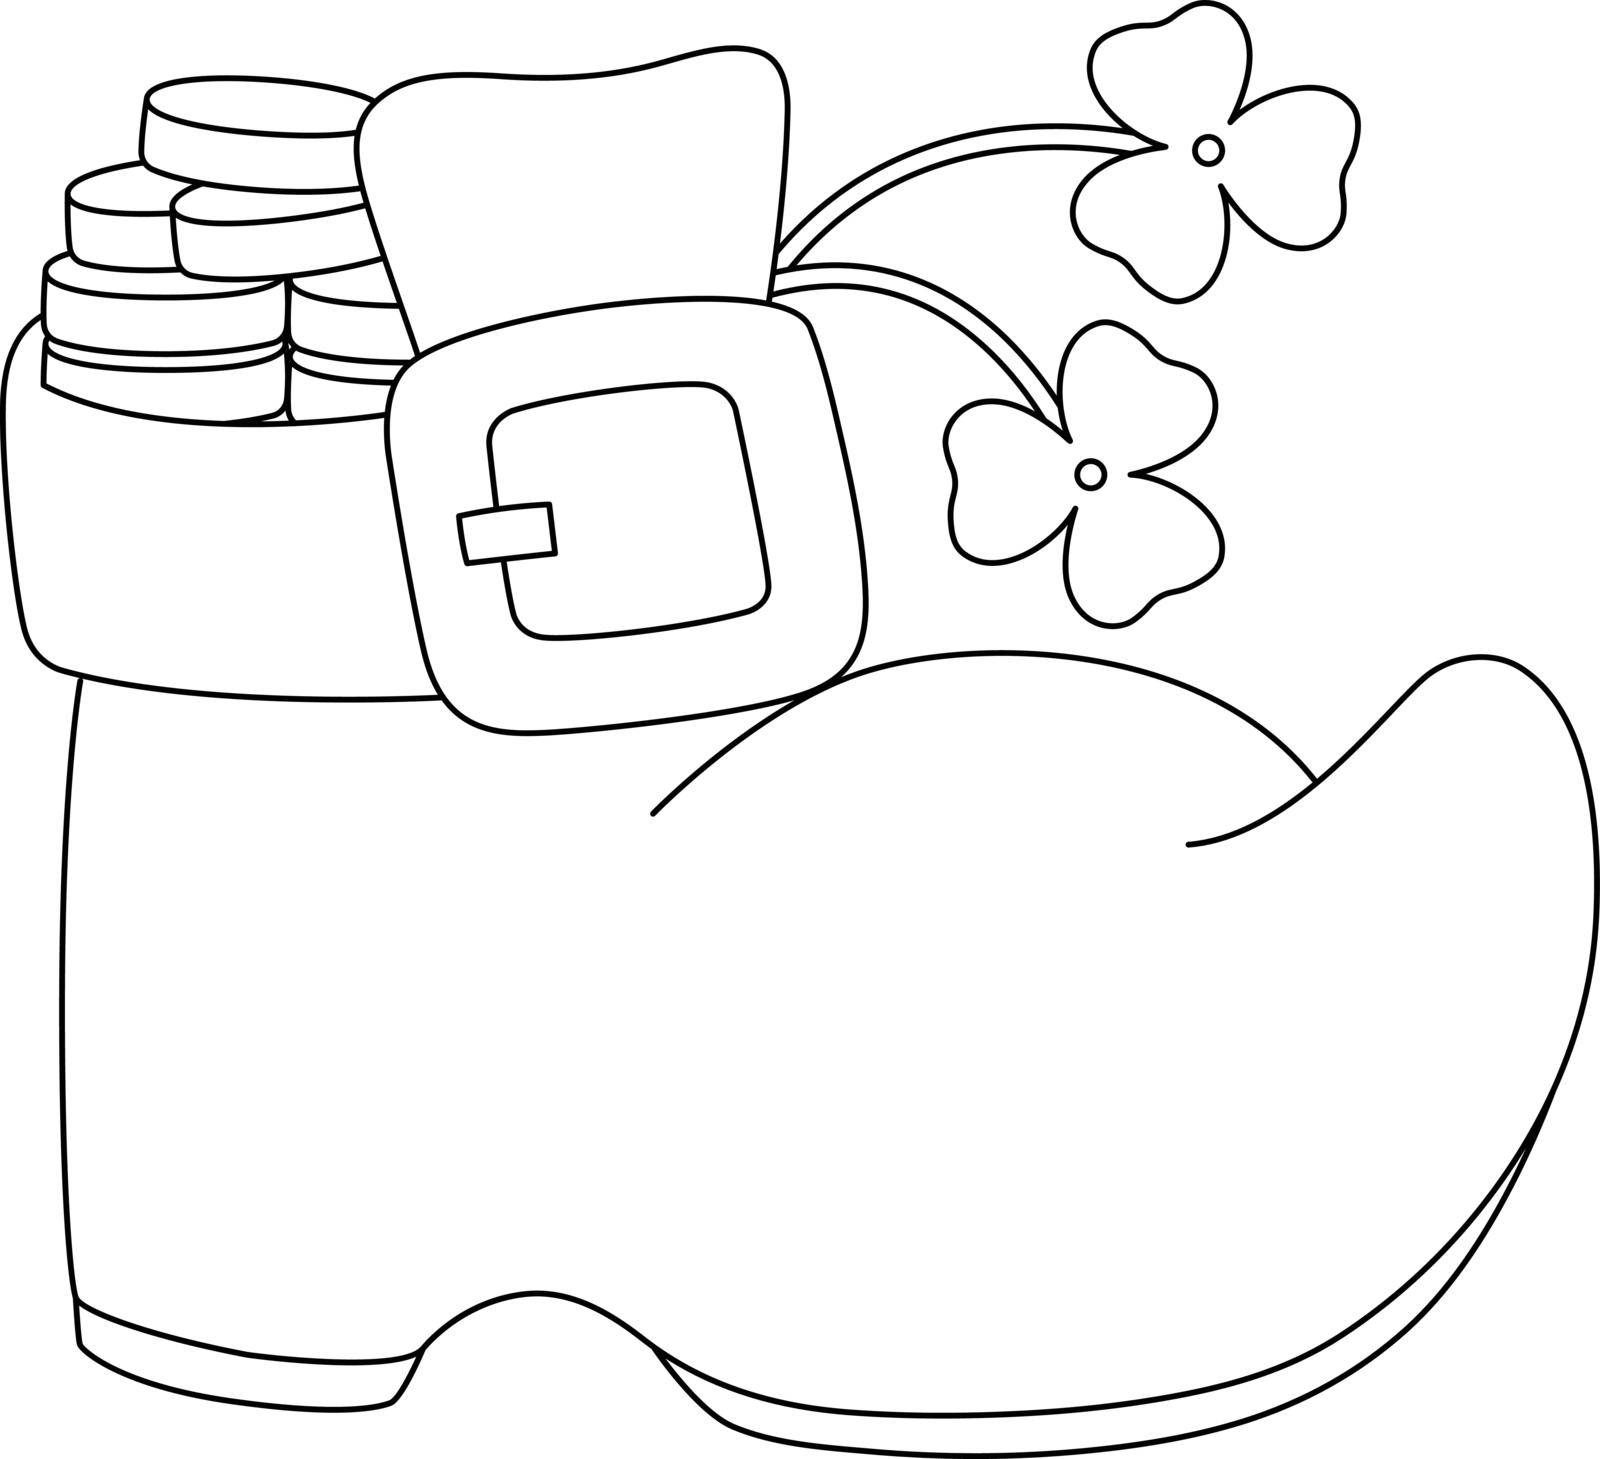 St. Patricks Day Shoe Coloring Page for Kids by abbydesign